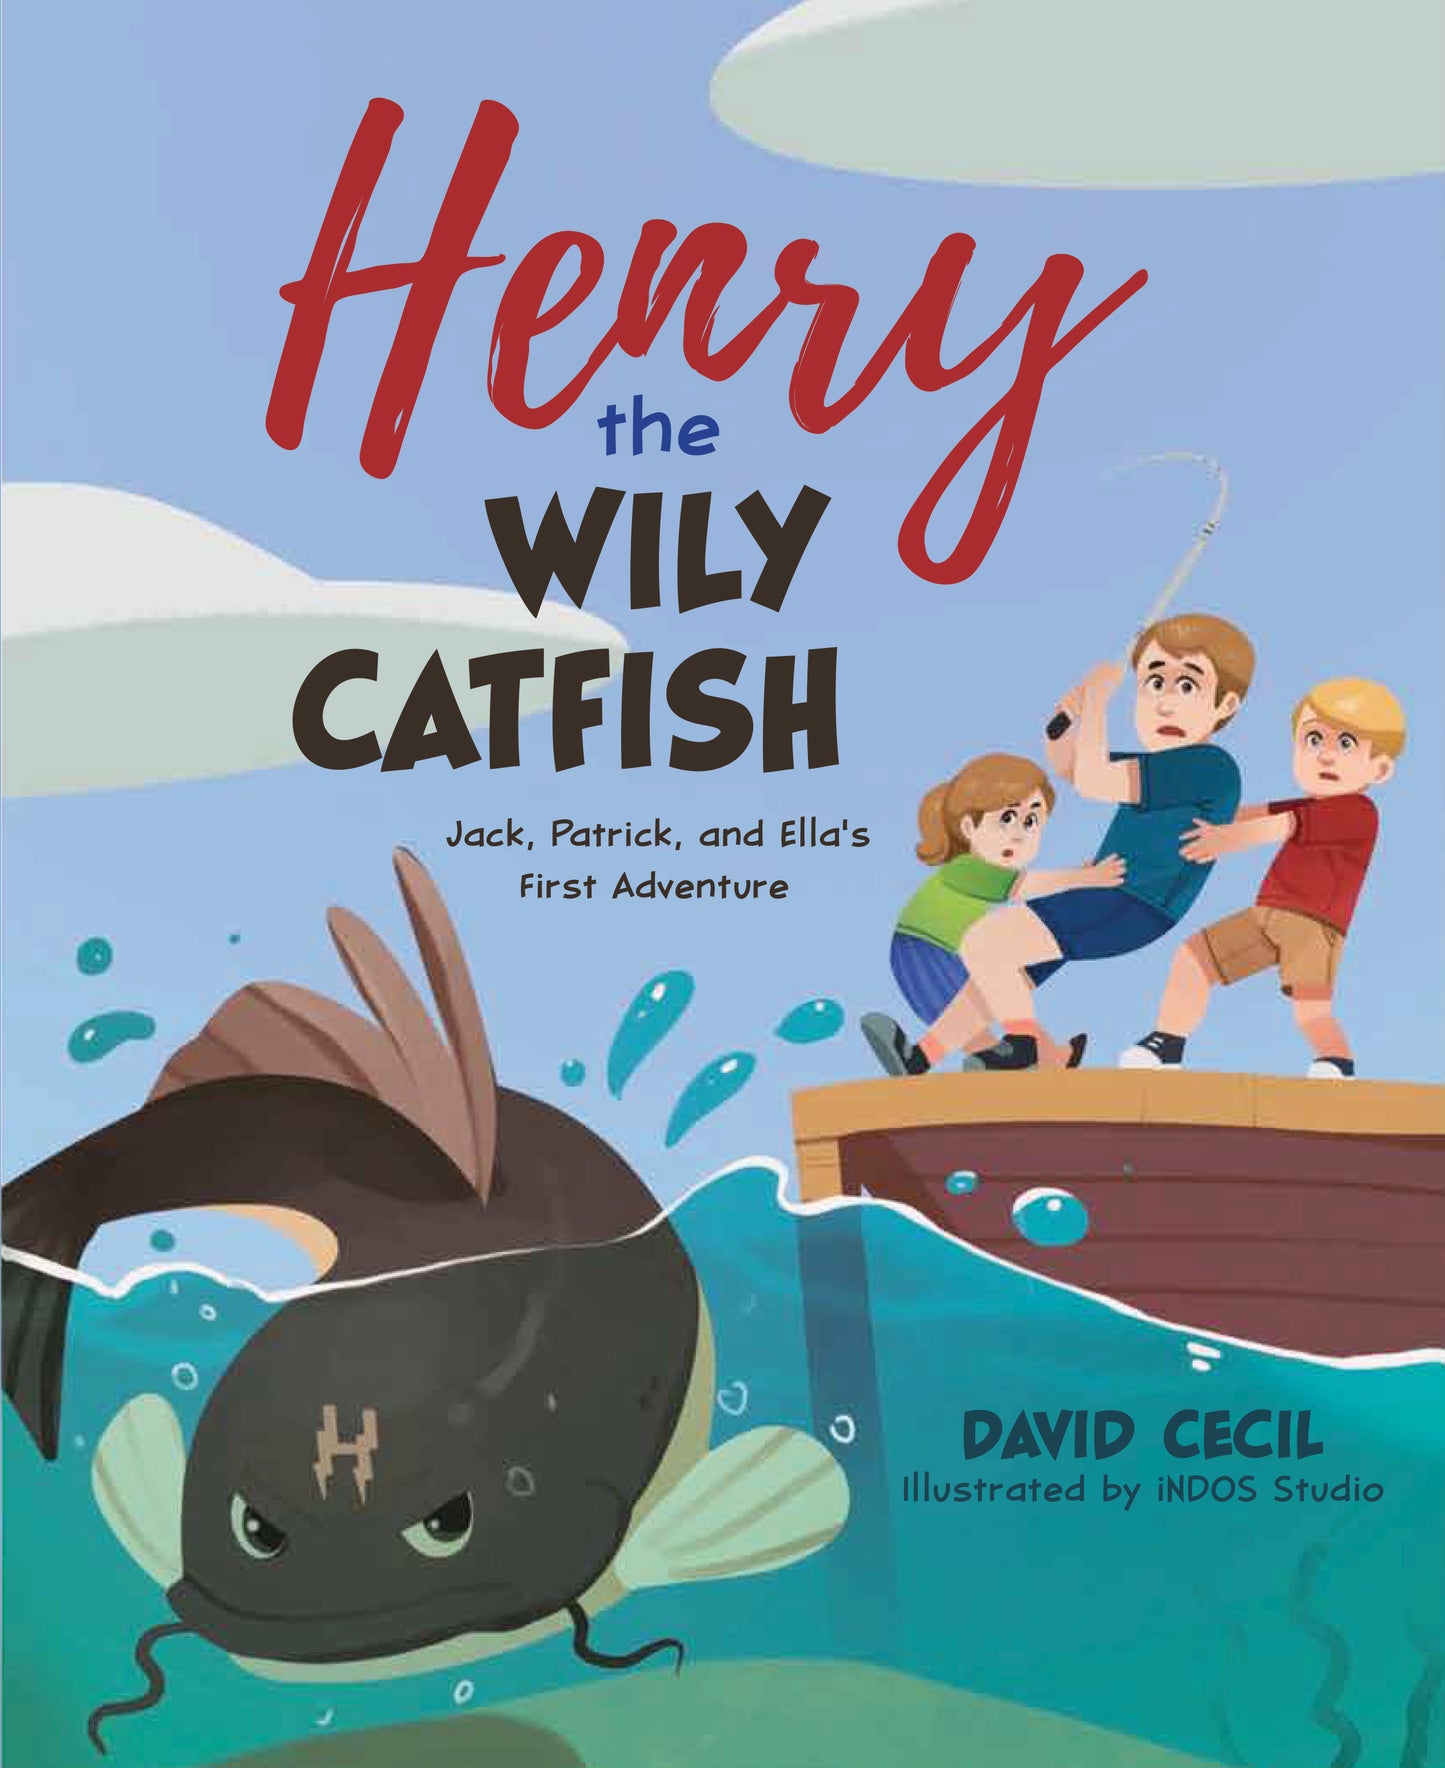 Henry the Wily Catfish: Jack, Patrick, and Ella's First Adventure